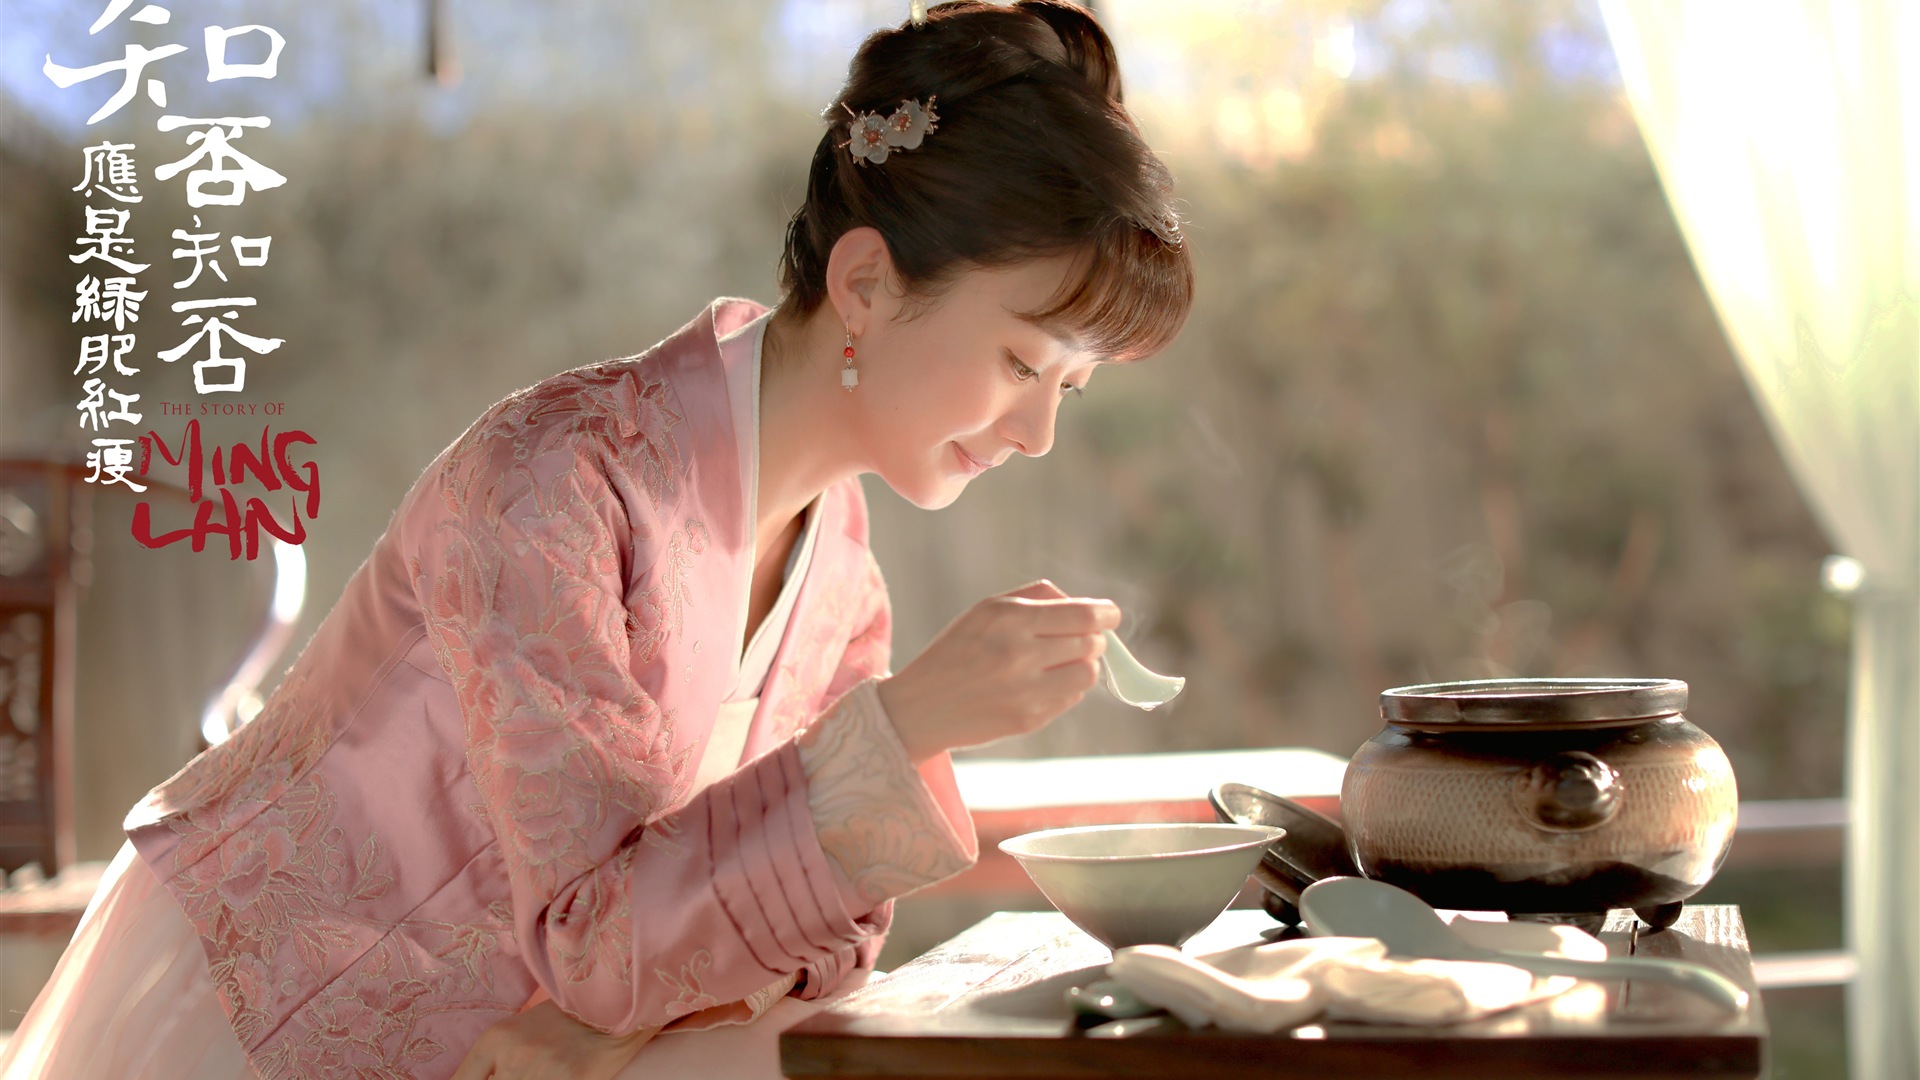 The Story Of MingLan, TV series HD wallpapers #29 - 1920x1080